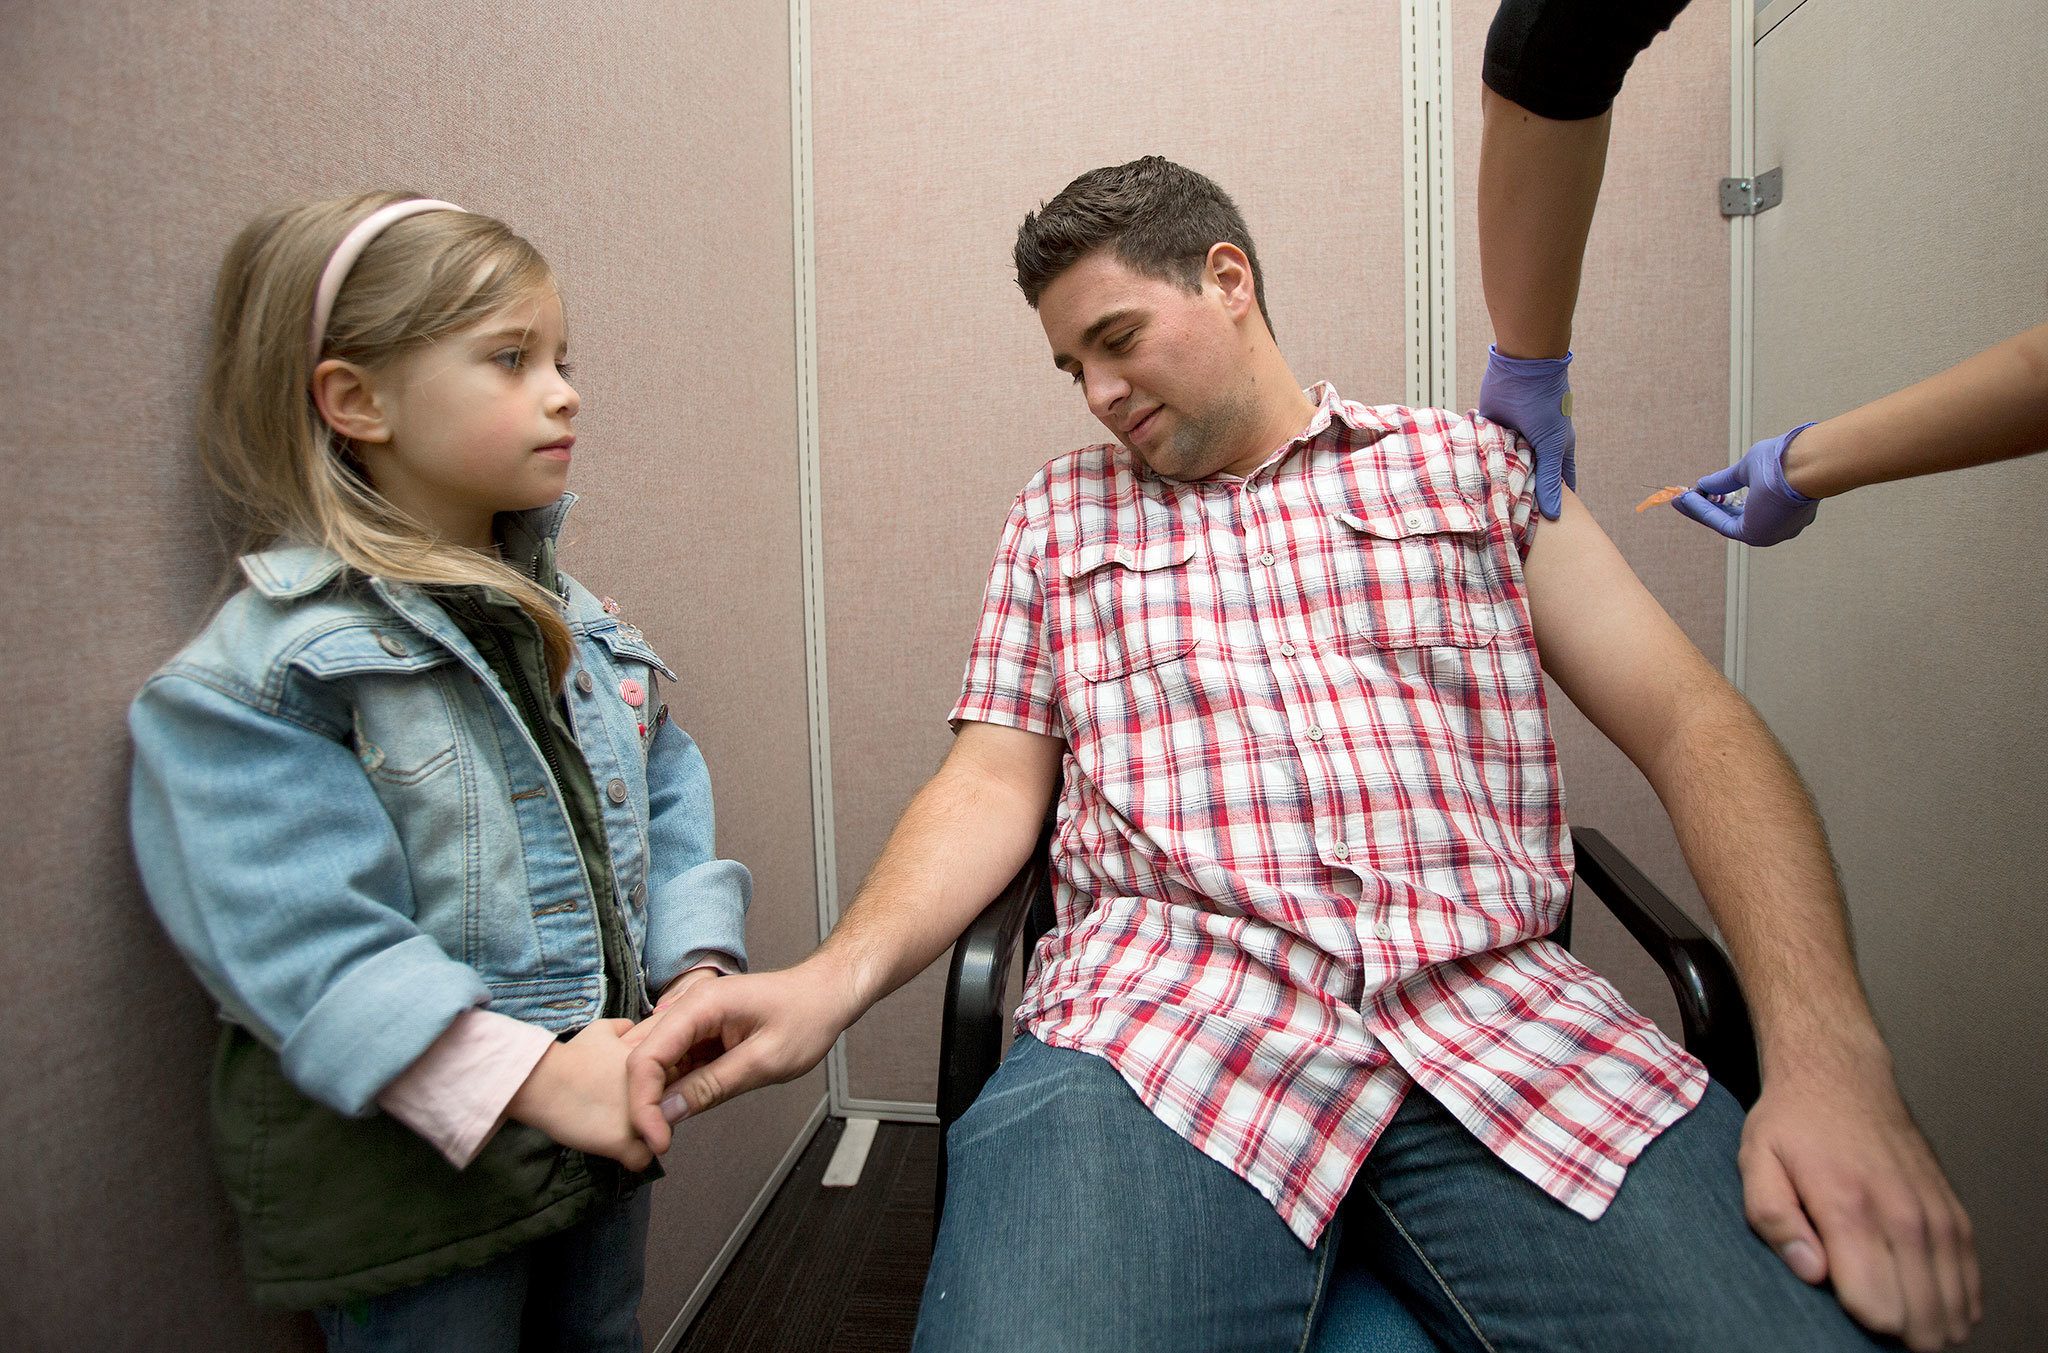 Parker Castano, who admits a fear of needles, has his hand held by his niece, Adeline, 4, as he gets a flu shot at the Everett Clinic on Thursday in Everett. (Andy Bronson / The Herald)